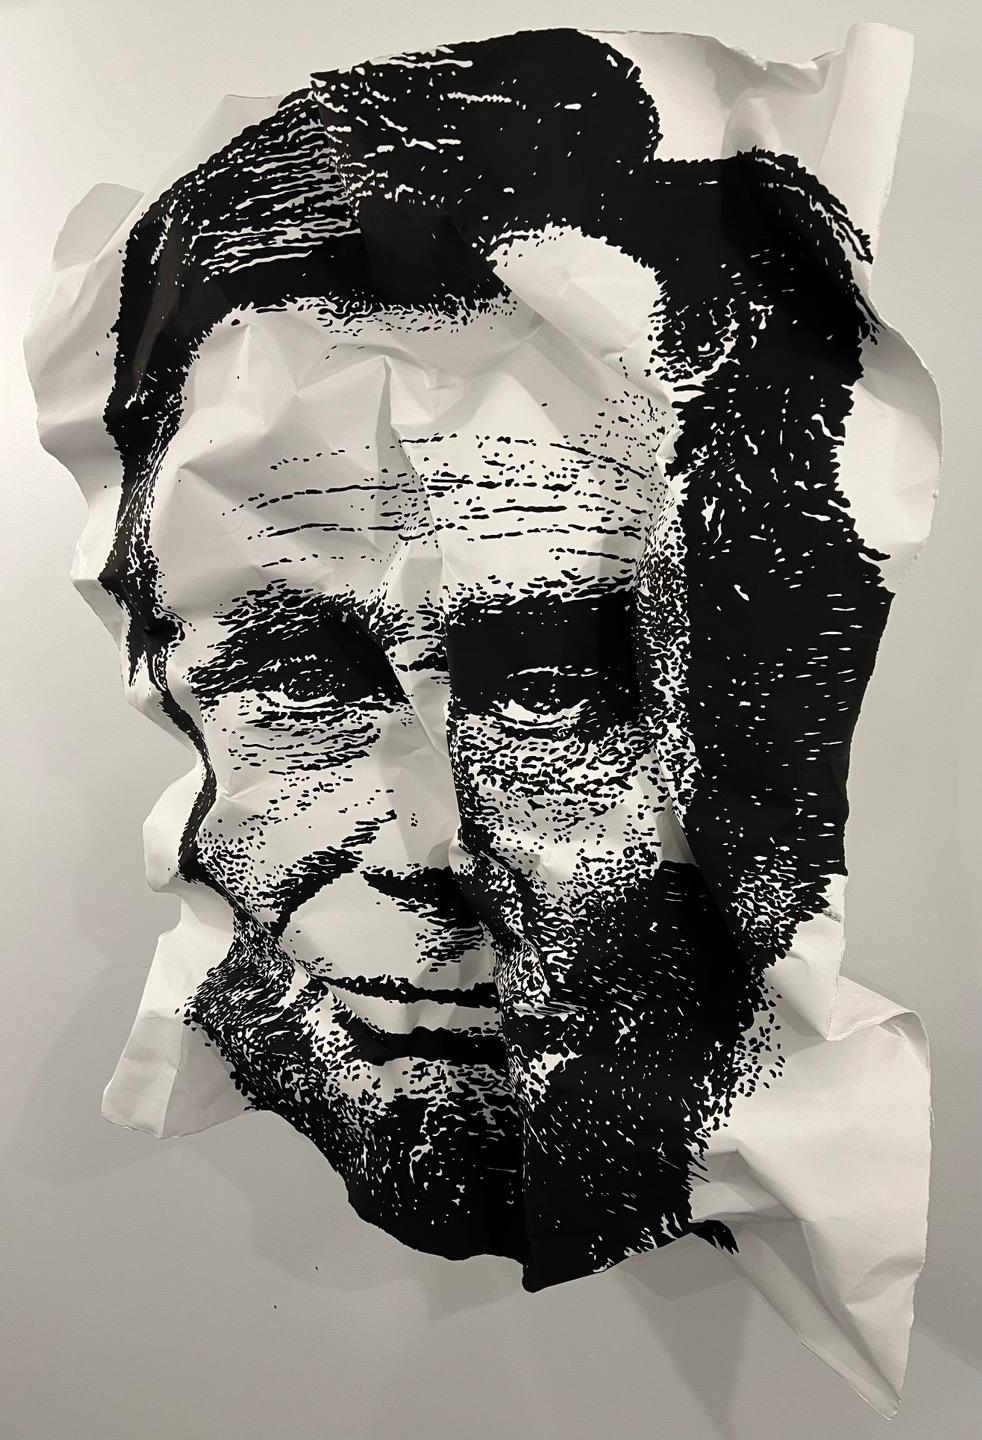 Lincoln - Painting by Bret Reilly